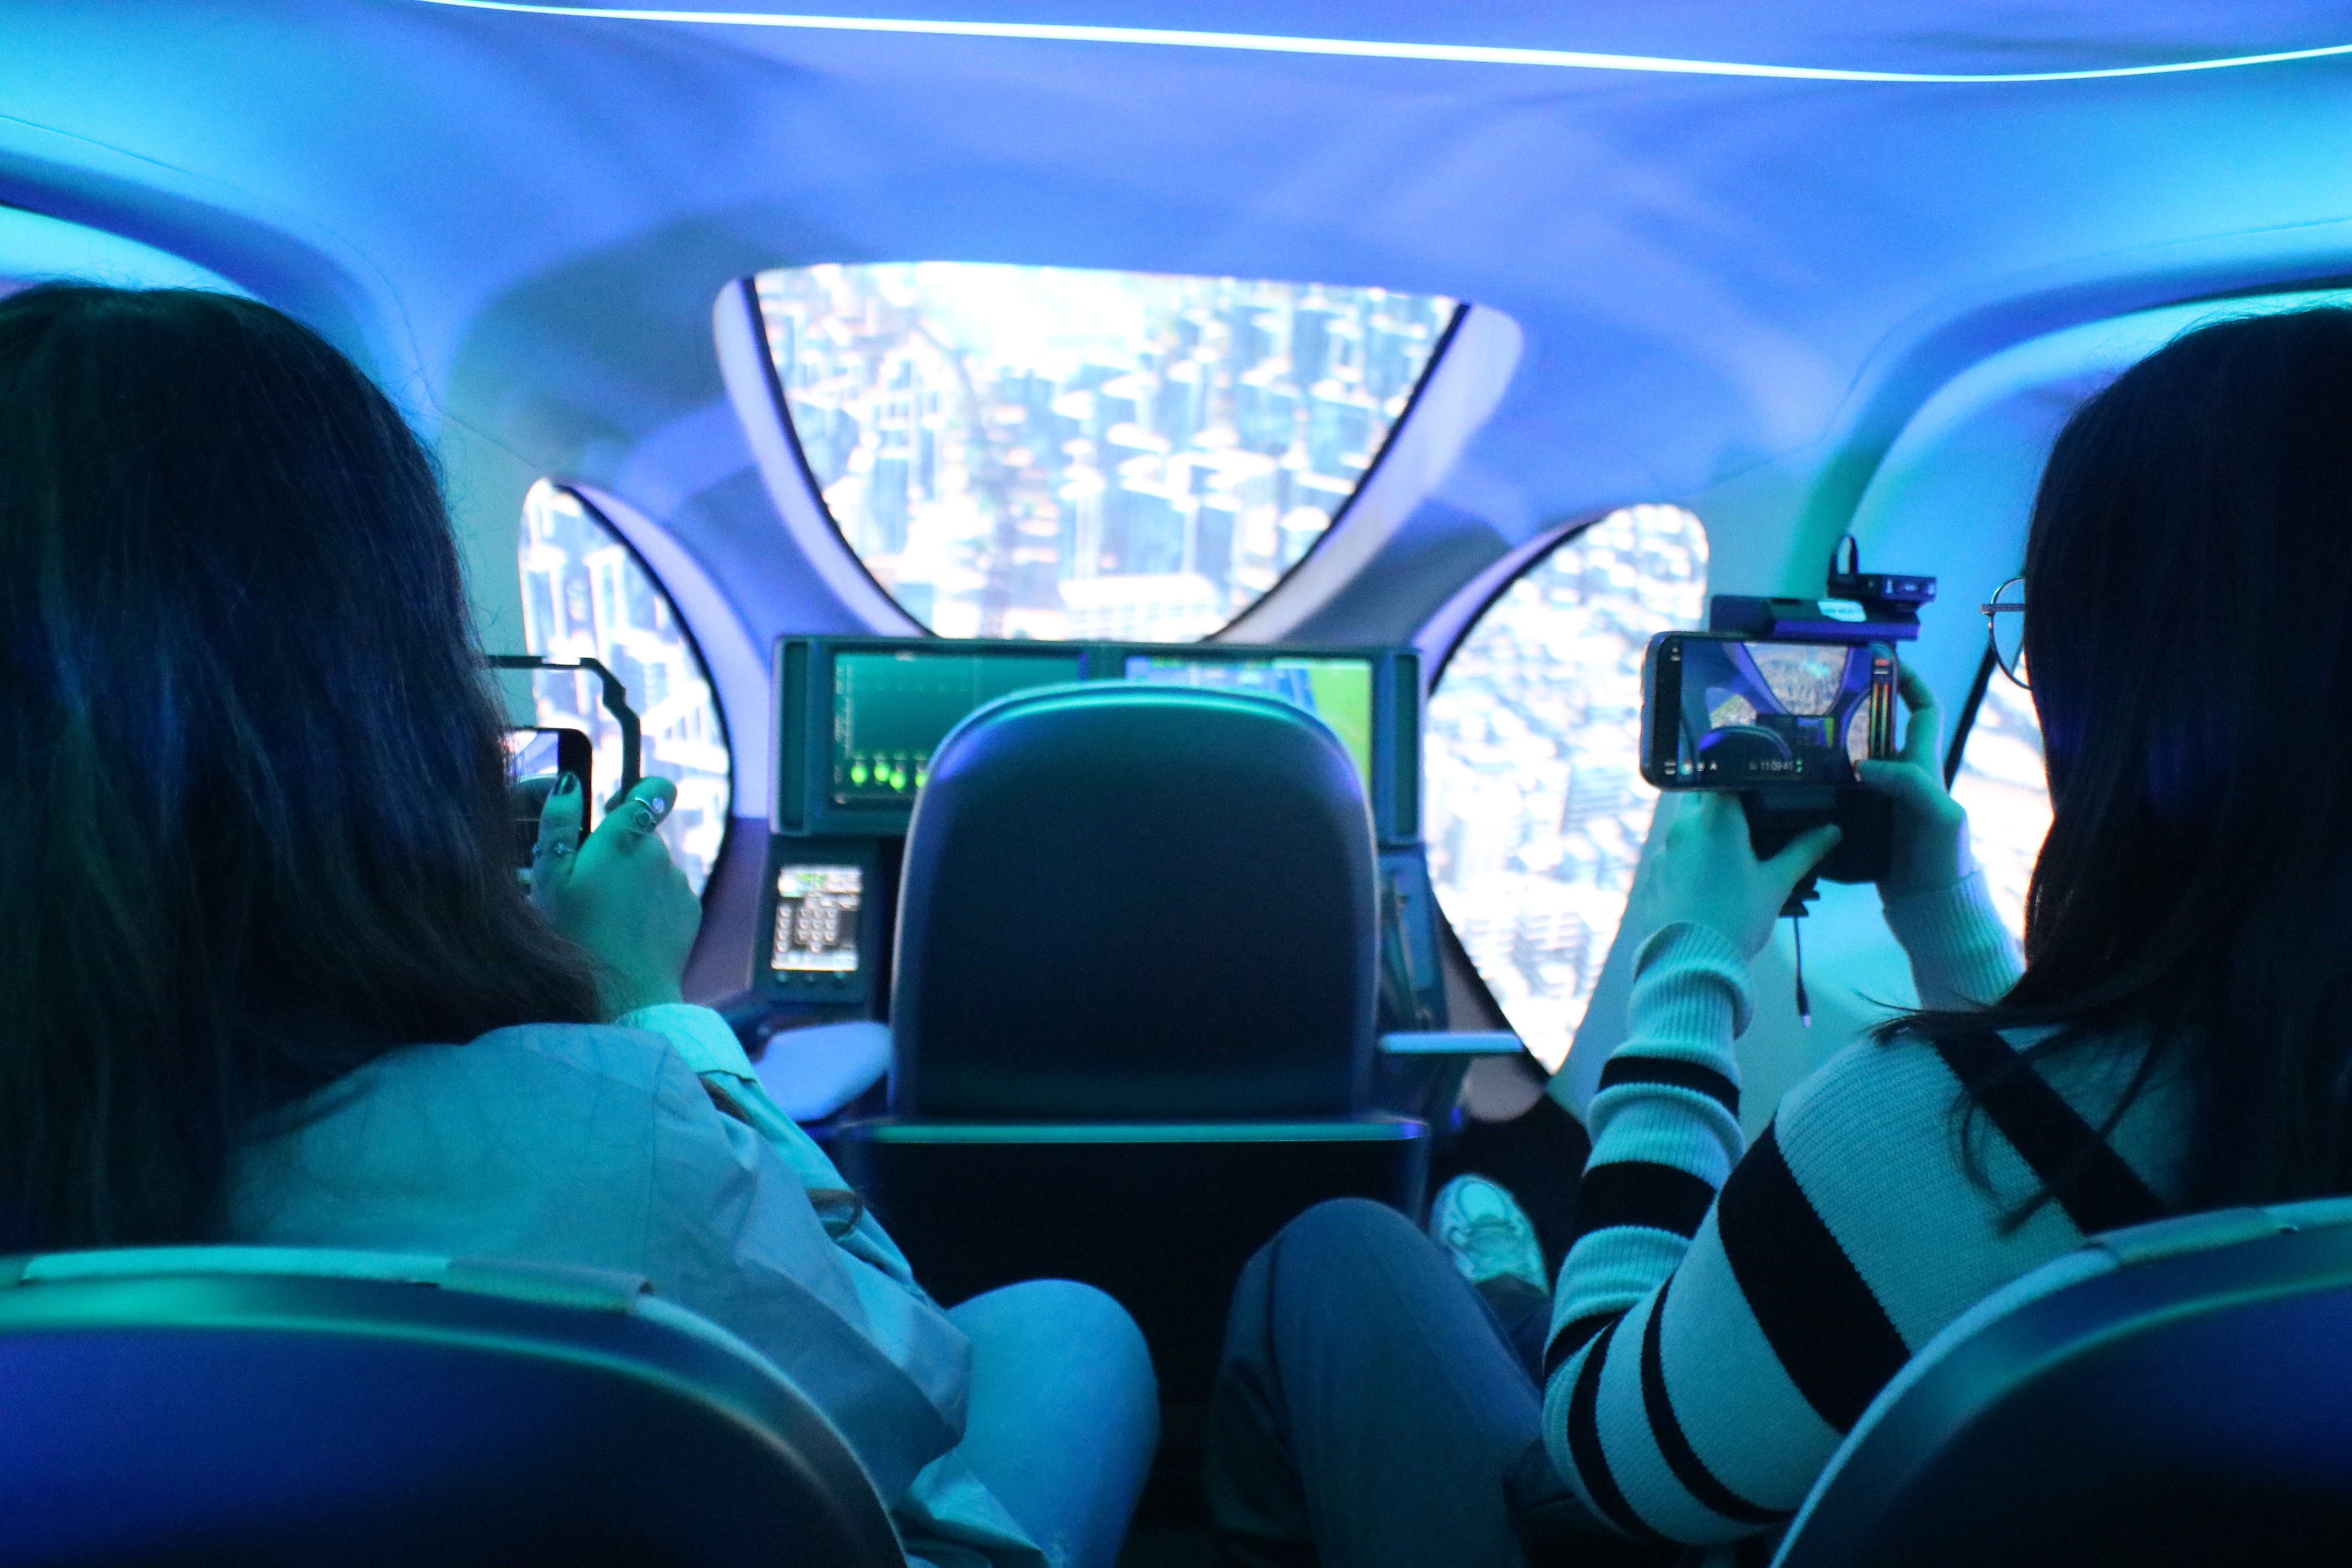 Interior of the flying urban drone created by SK Telecom